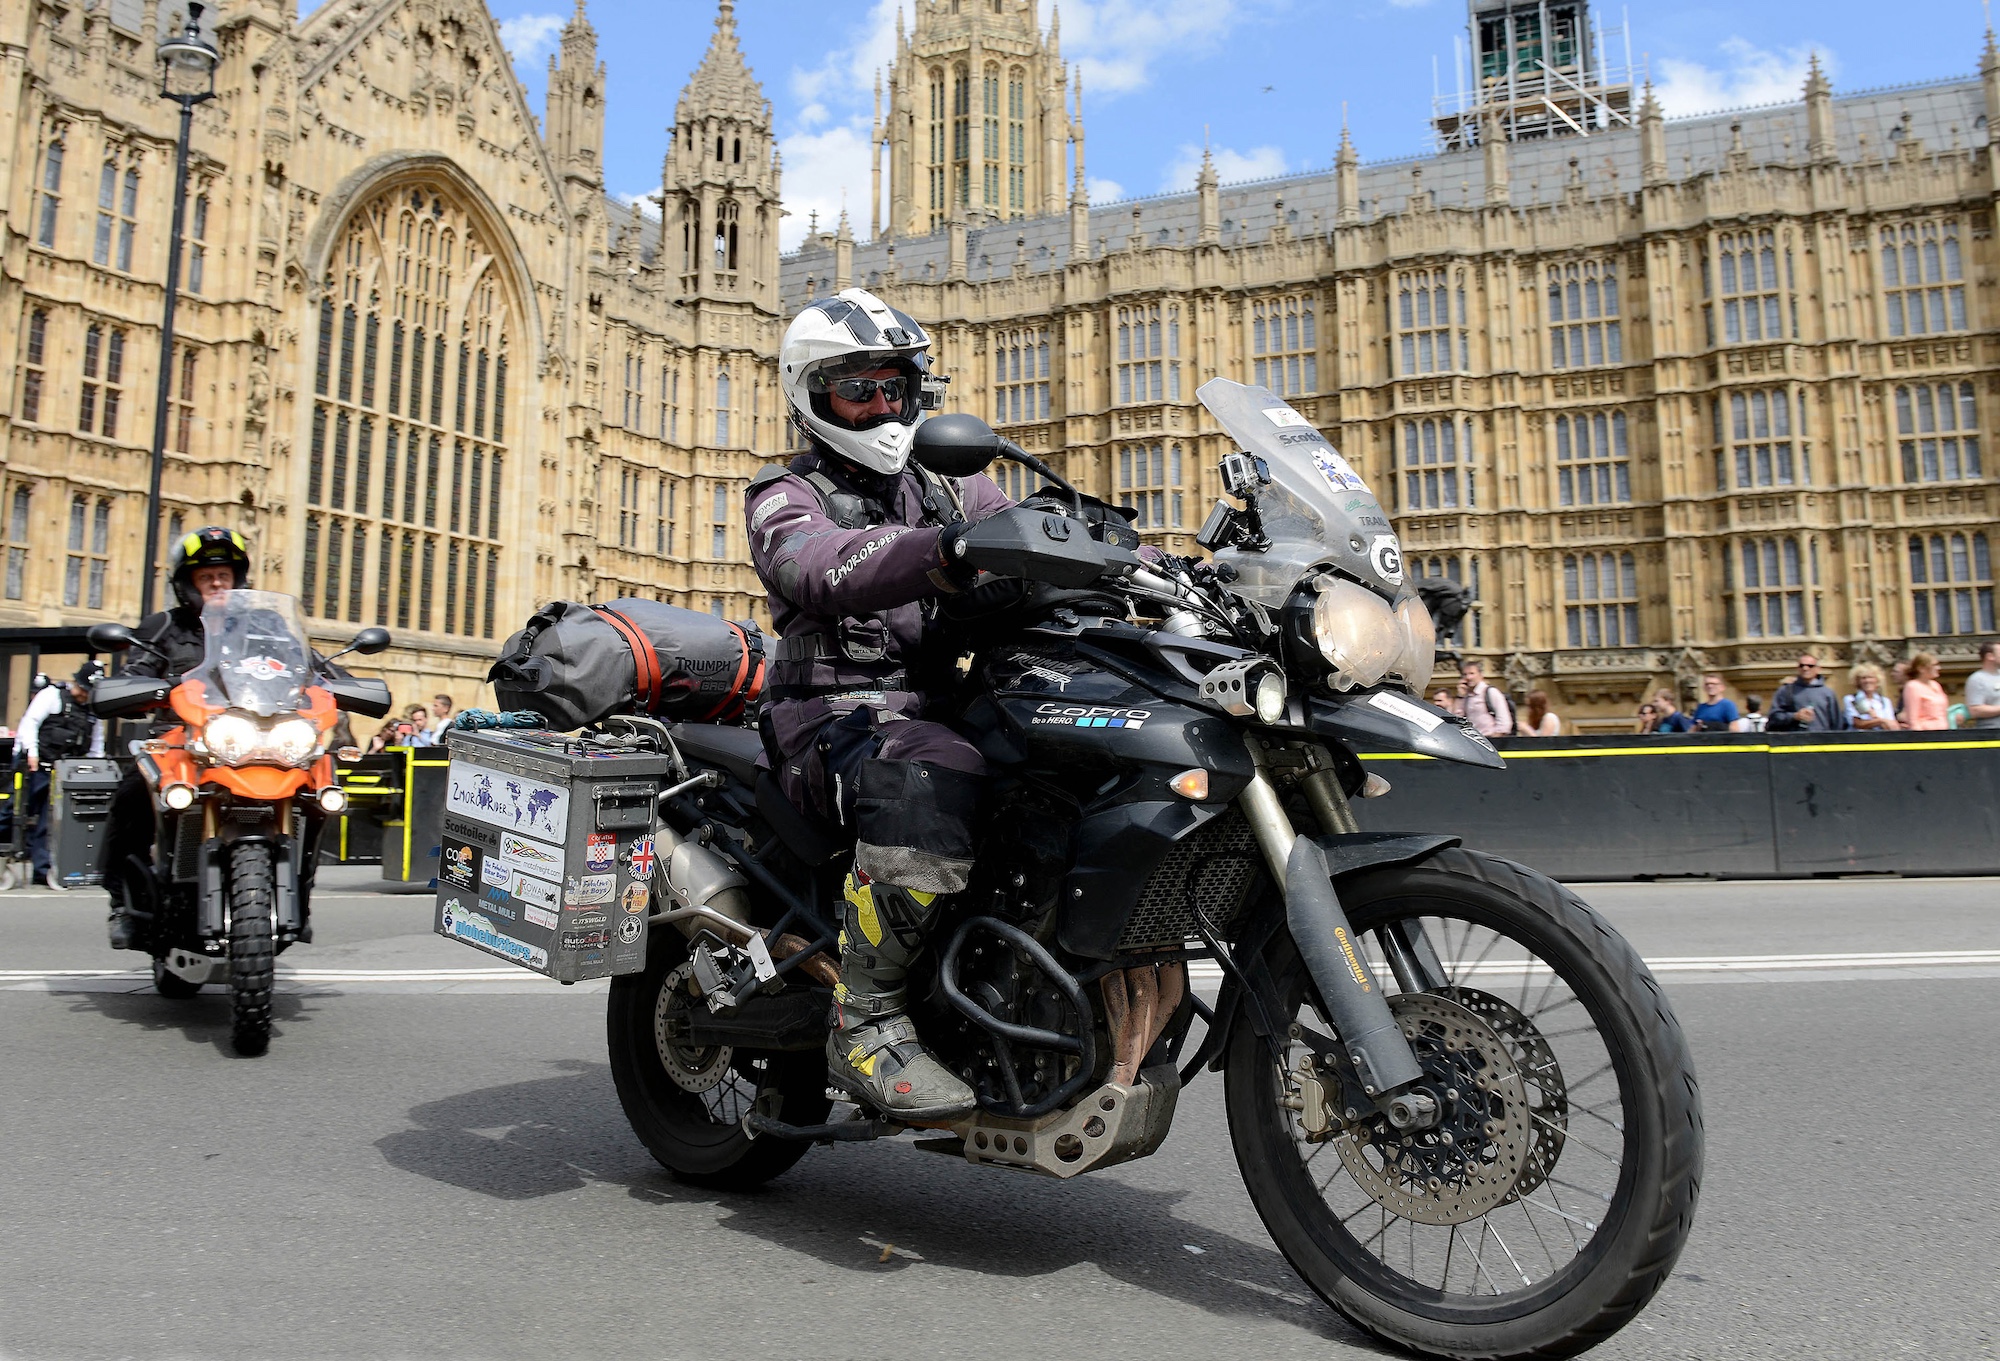 A motorcyclist in front of the Parliament building.